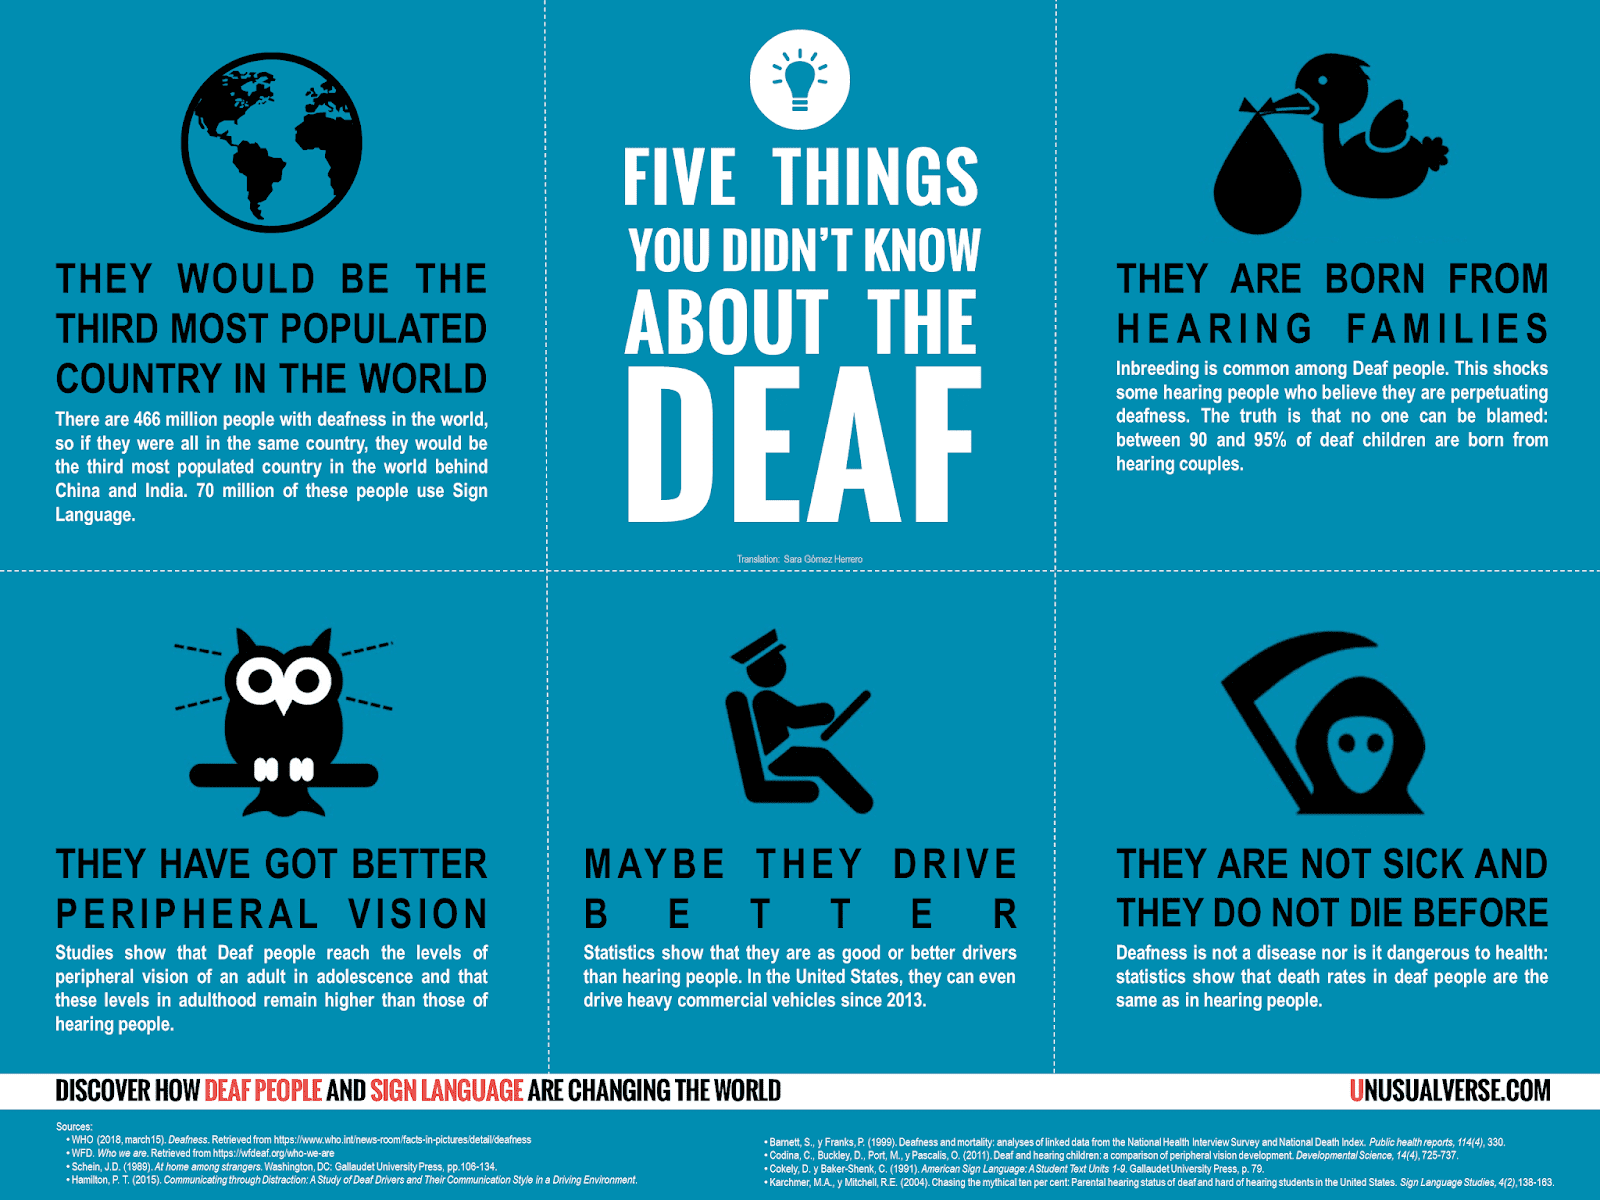 current issues in deaf education